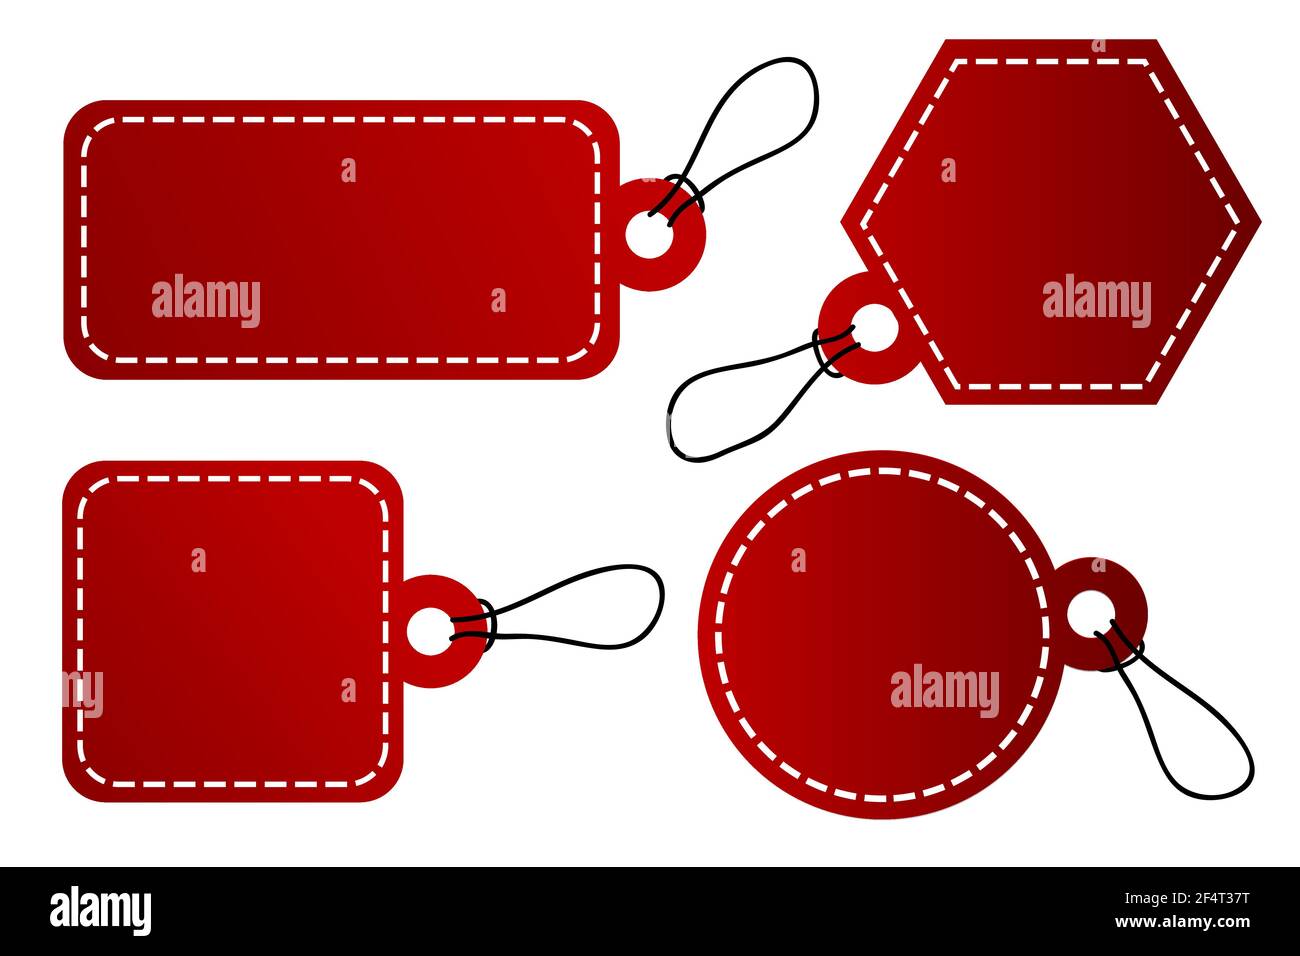 4 Shape Vector Red Gradient Tag, White Stitch Border With Black Rope, Isolated on White Stock Vector